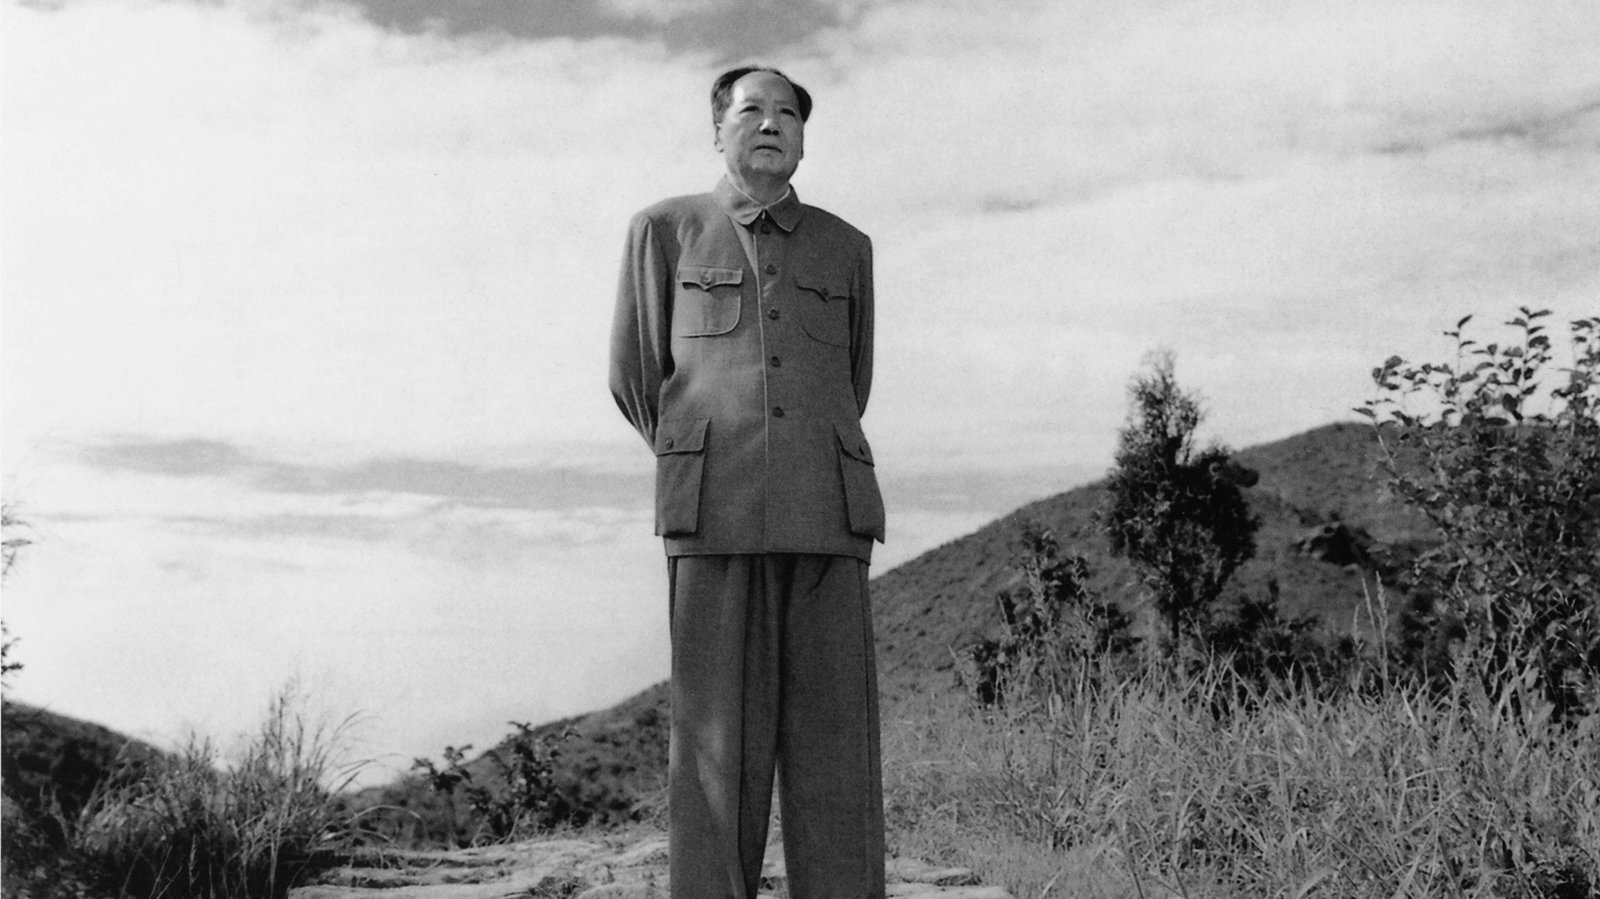 was chairman mao zedong a spoiled rich kid or a peasant